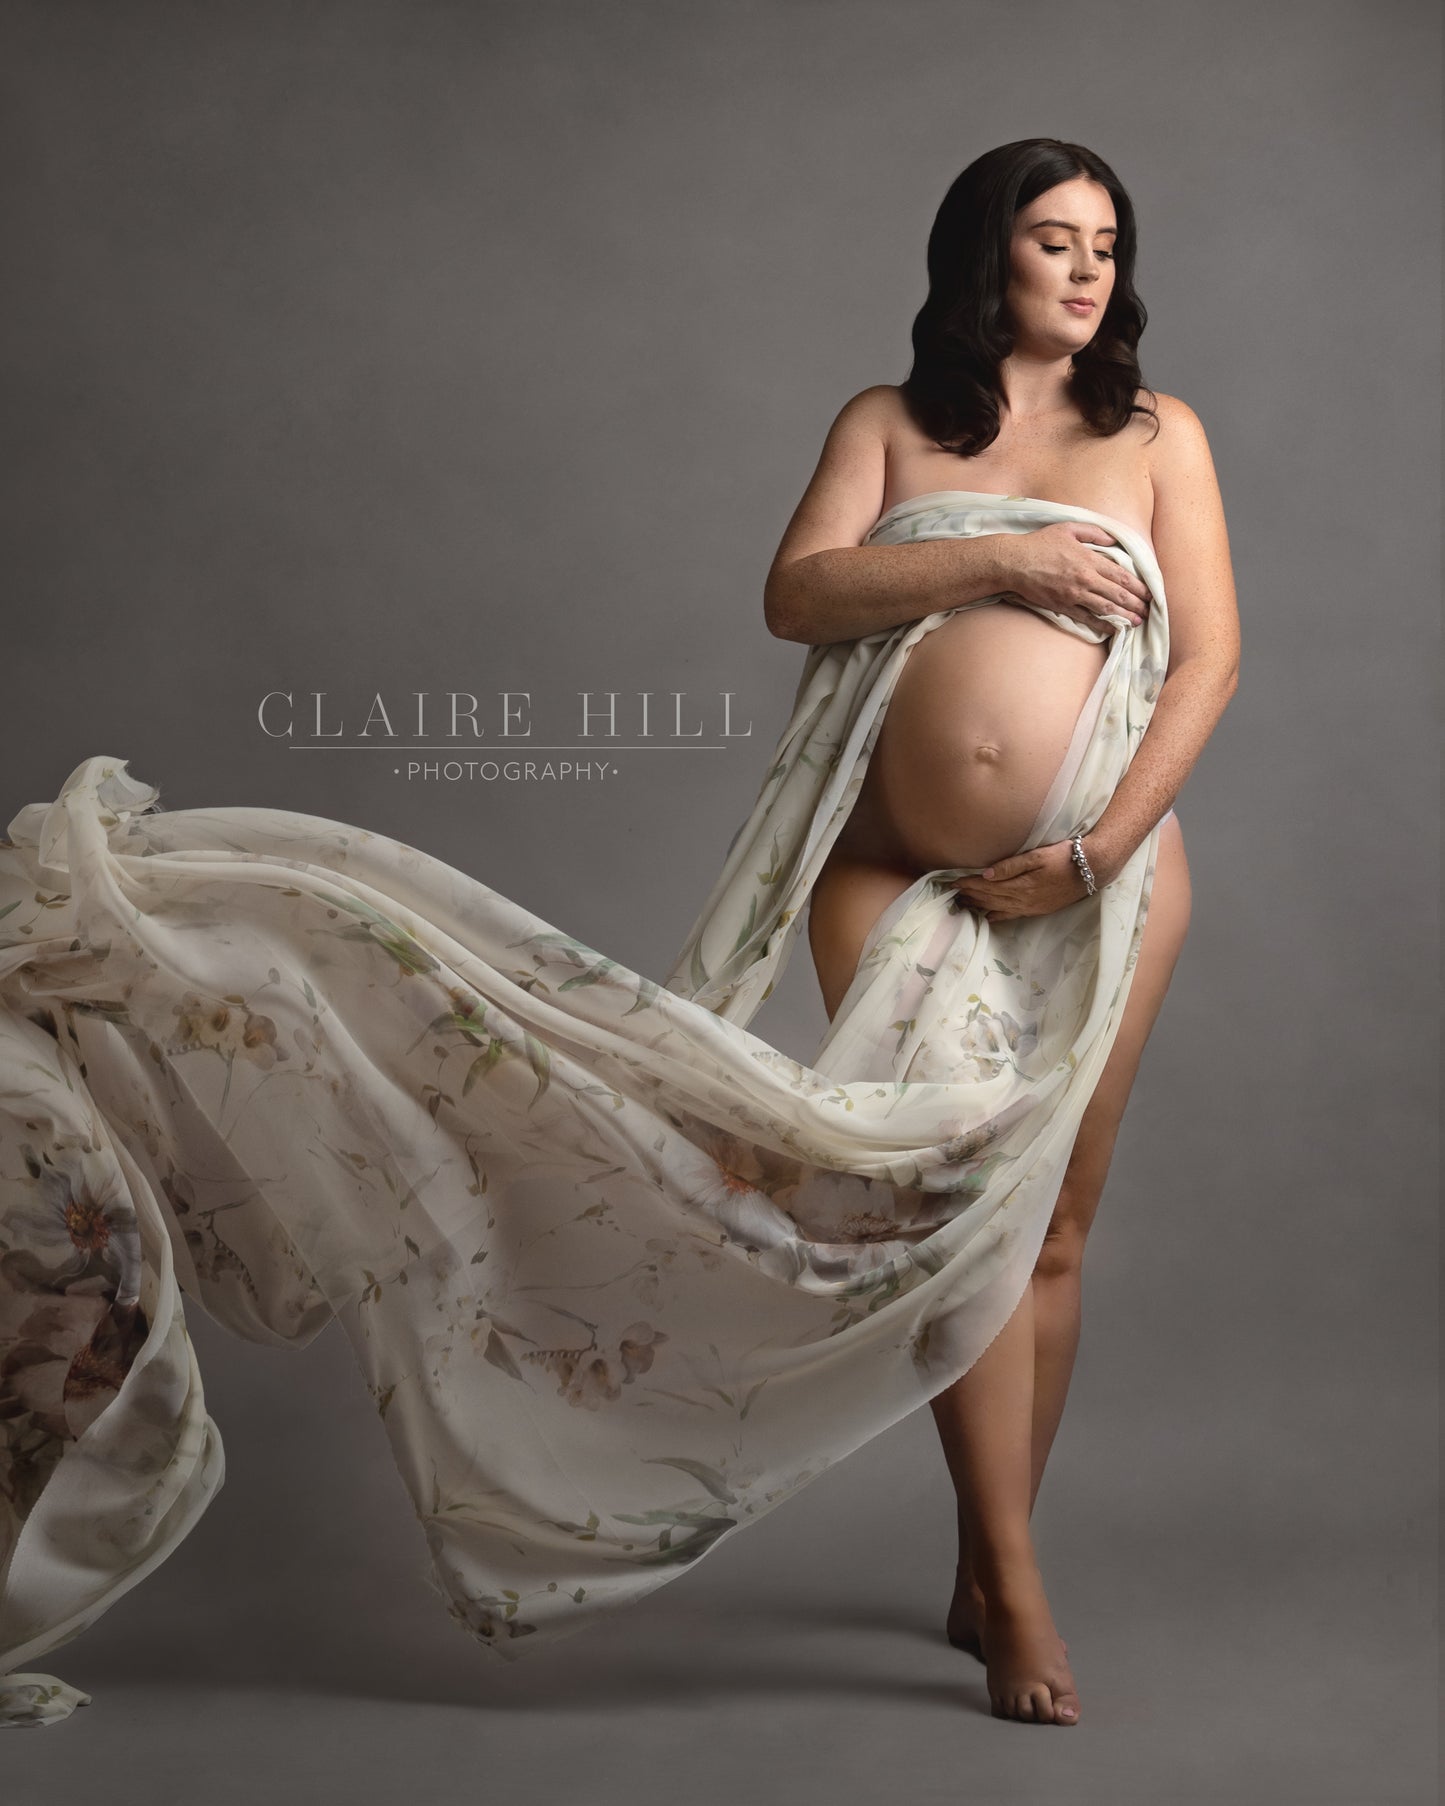 Fine art pregnancy photographer Claire Hill Photography based in Perton Wolverhampton Westmidands near Shropshire Birmingham and Staffordshire.